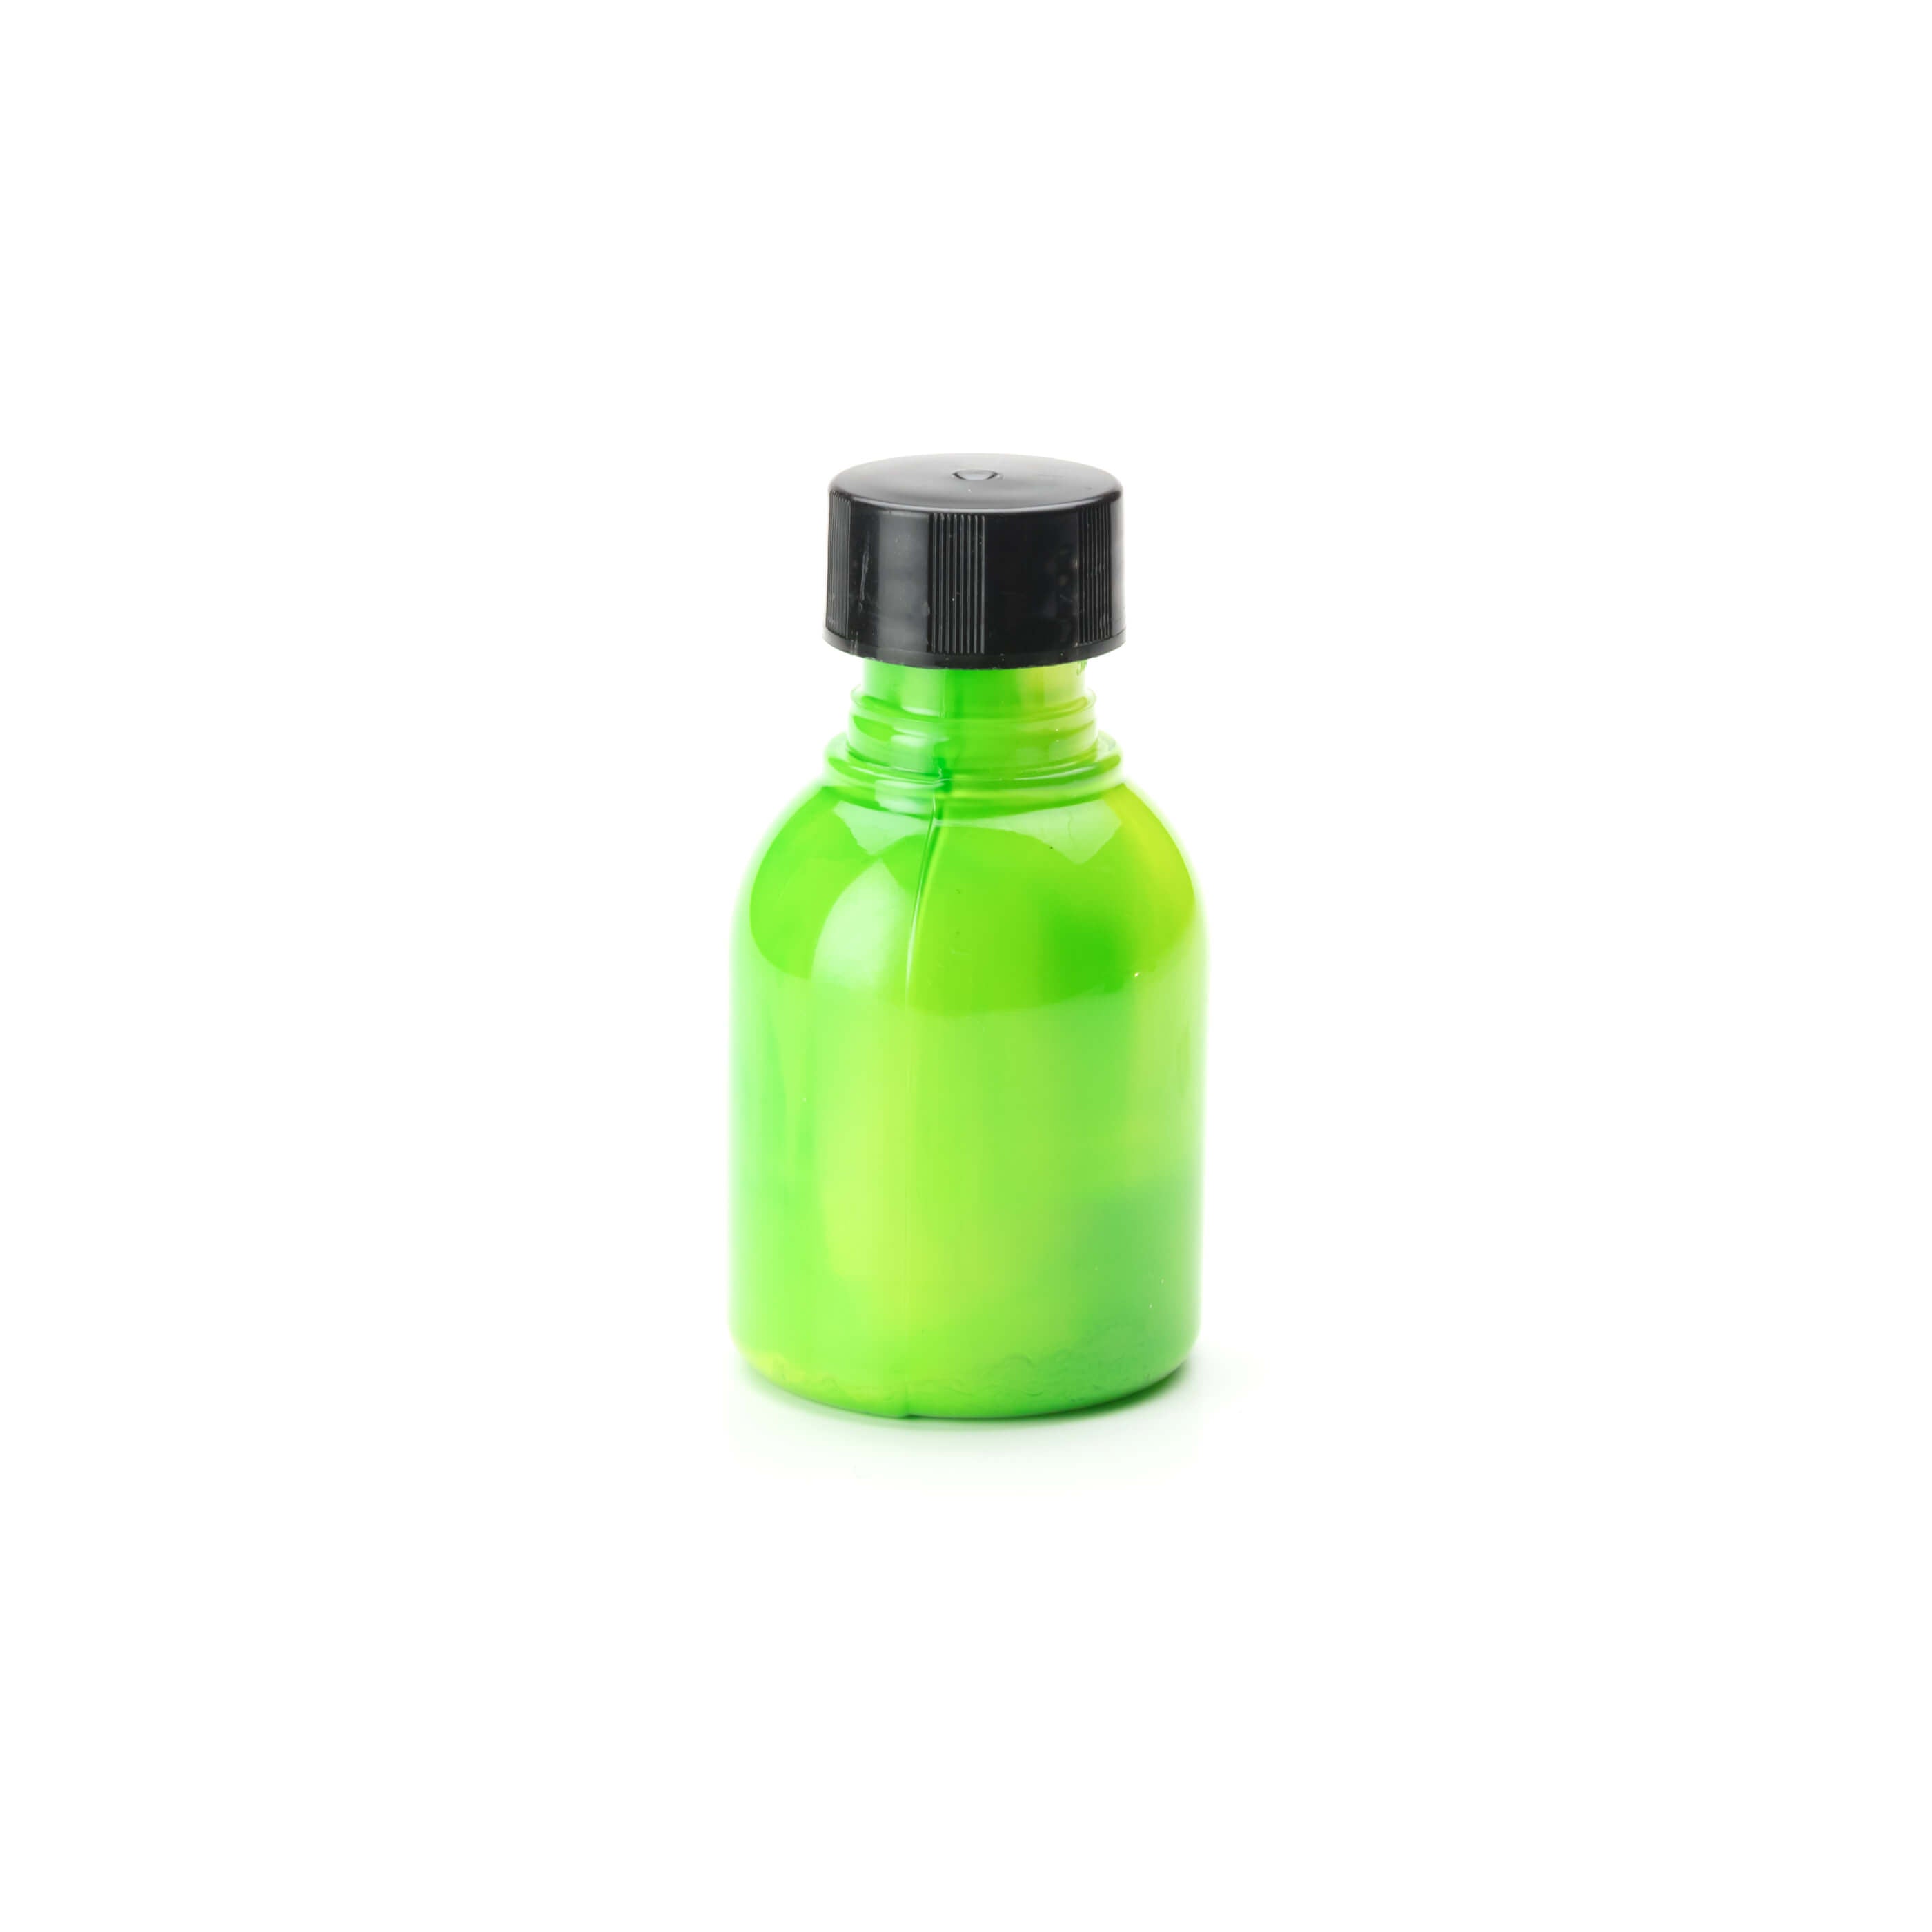 GREEN TOUCH UP PAINT BOTTLE 1 OZ